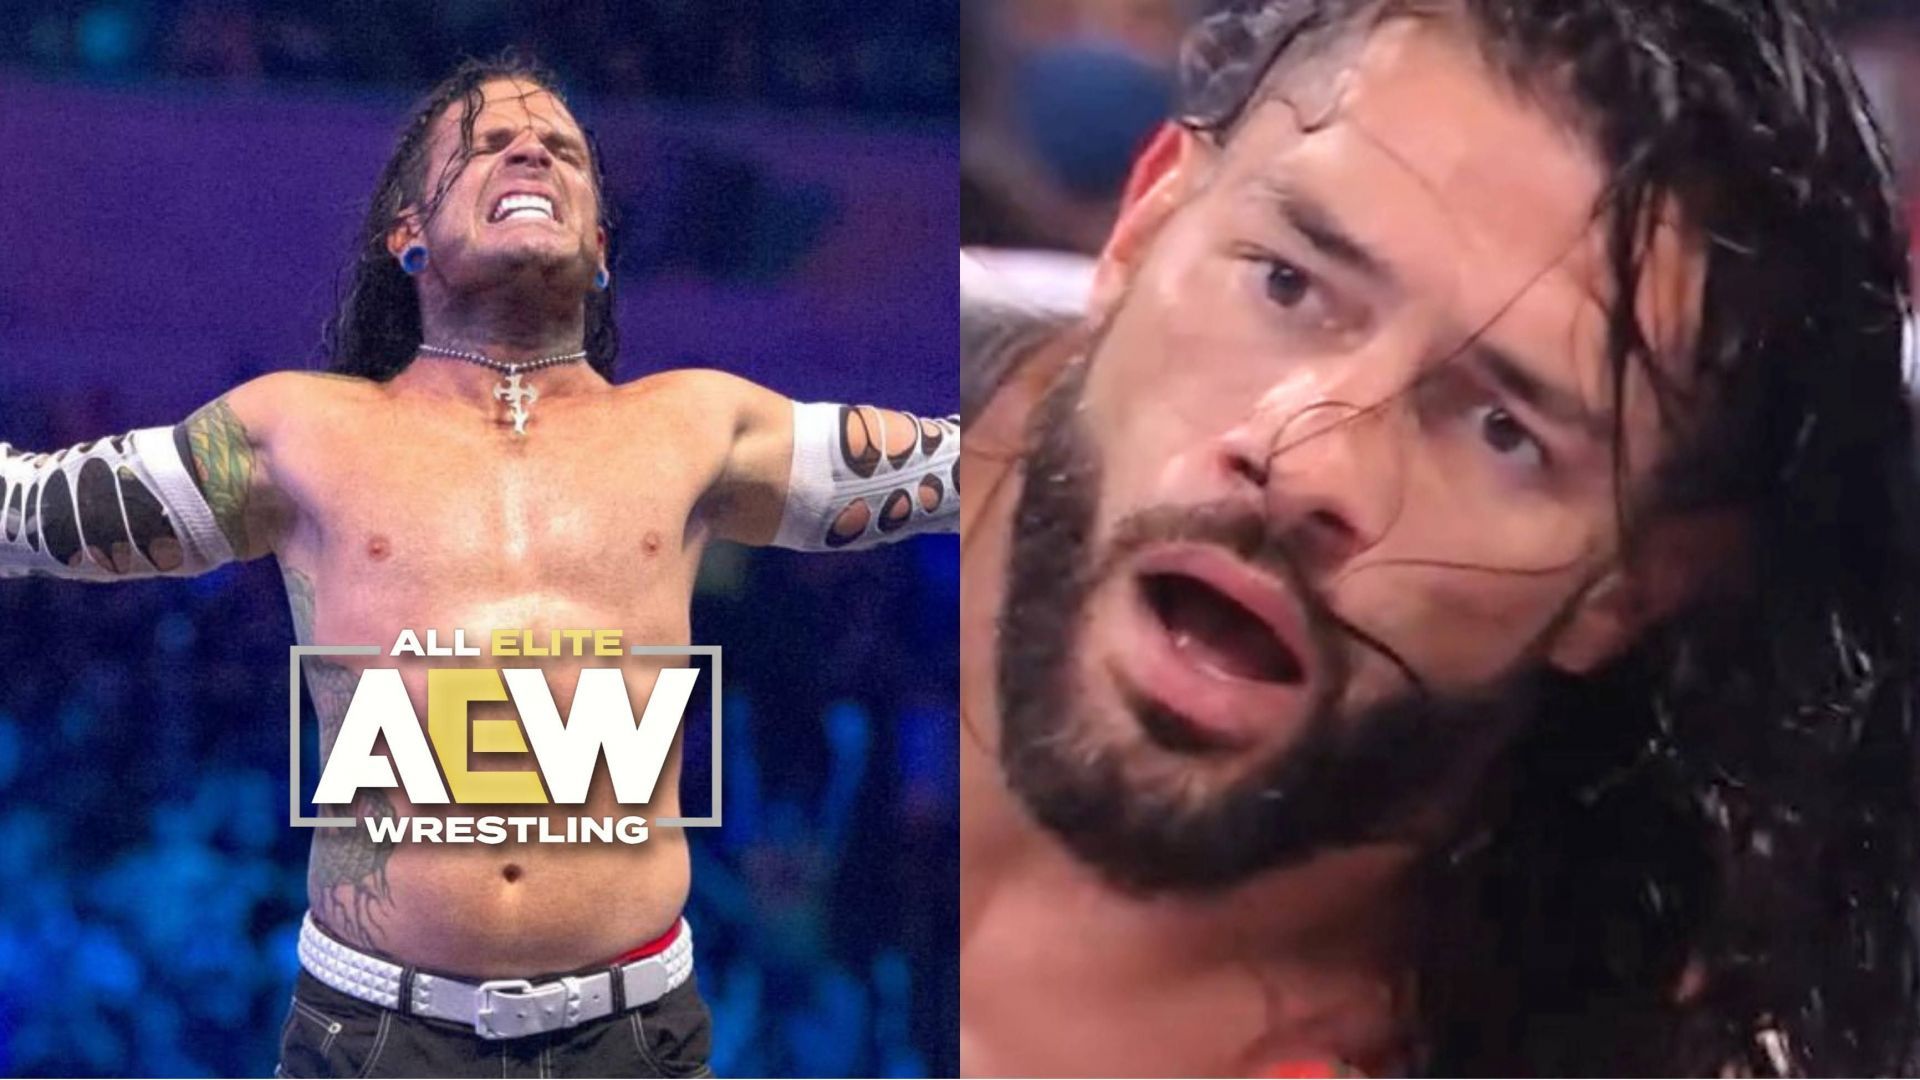 Jeff Hardy (left) and Roman Reigns (right)